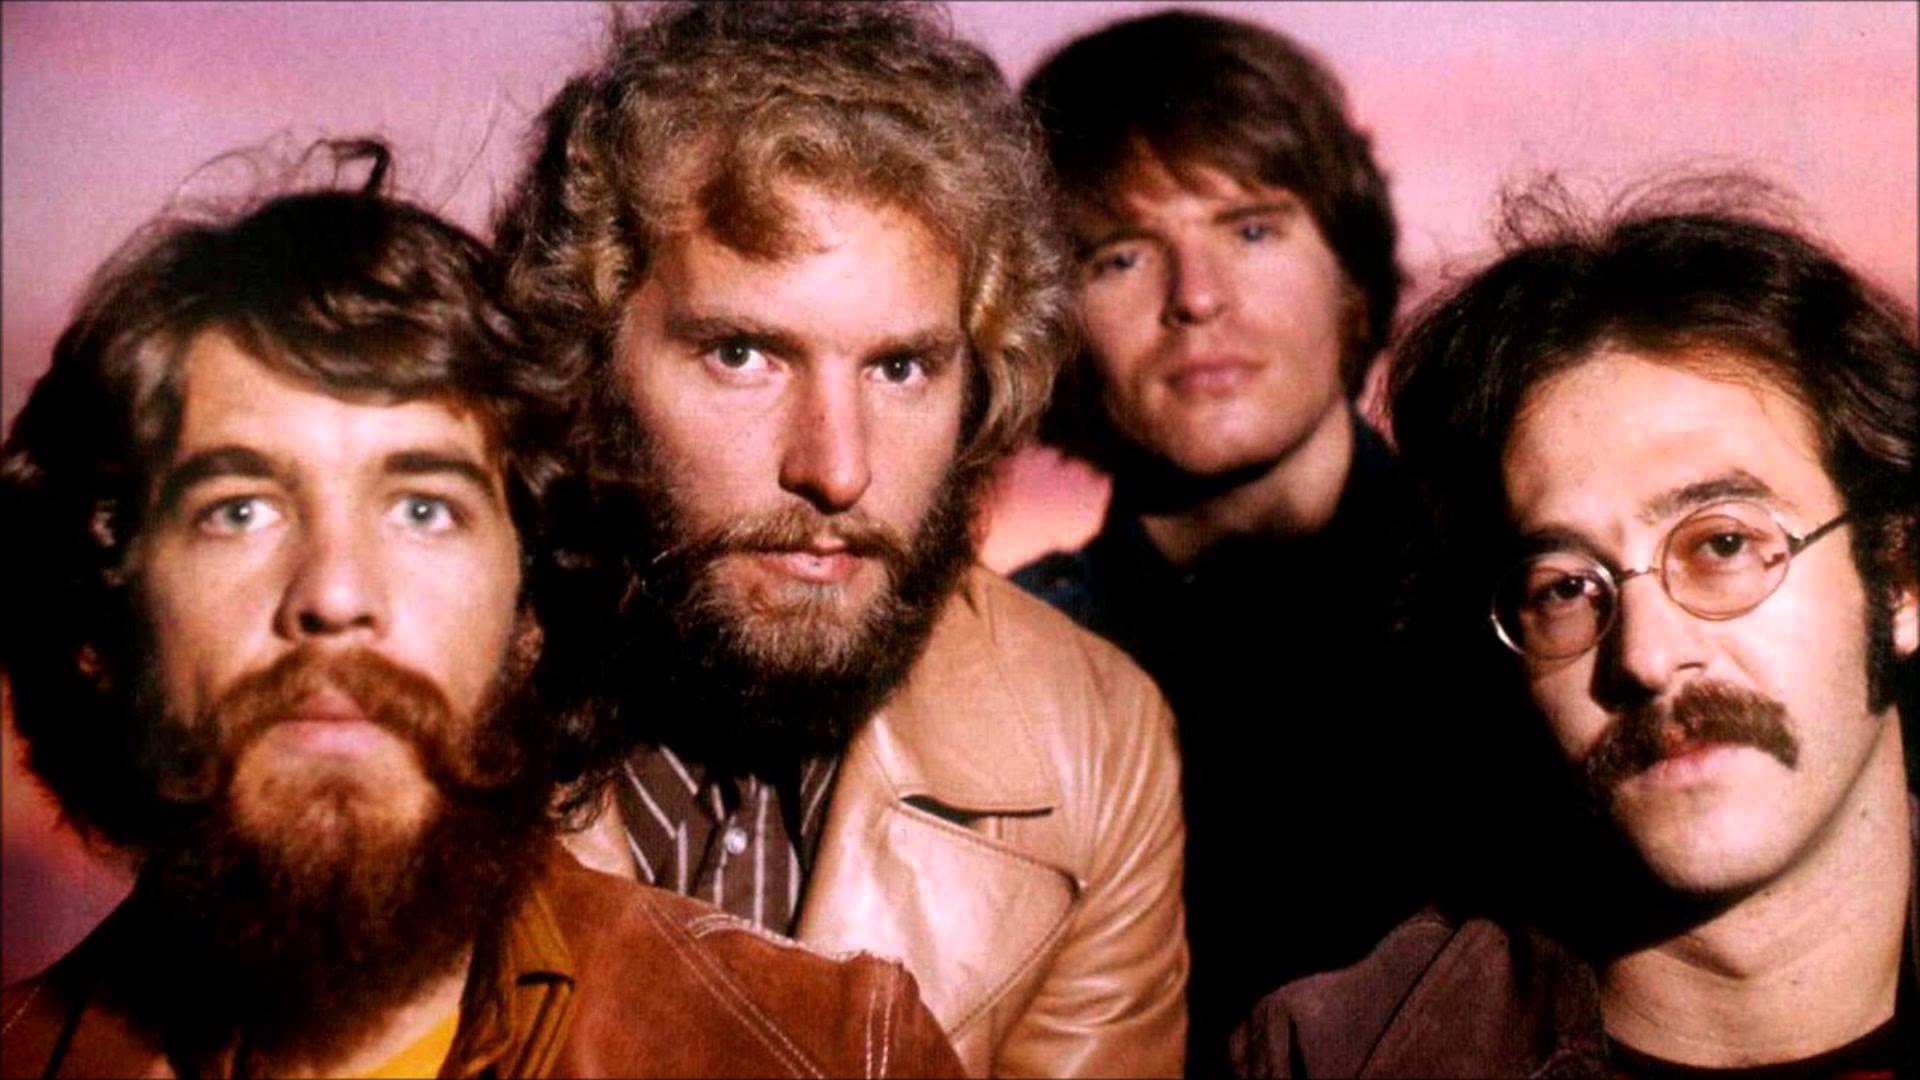 What broke up Creedence Clearwater Revival?